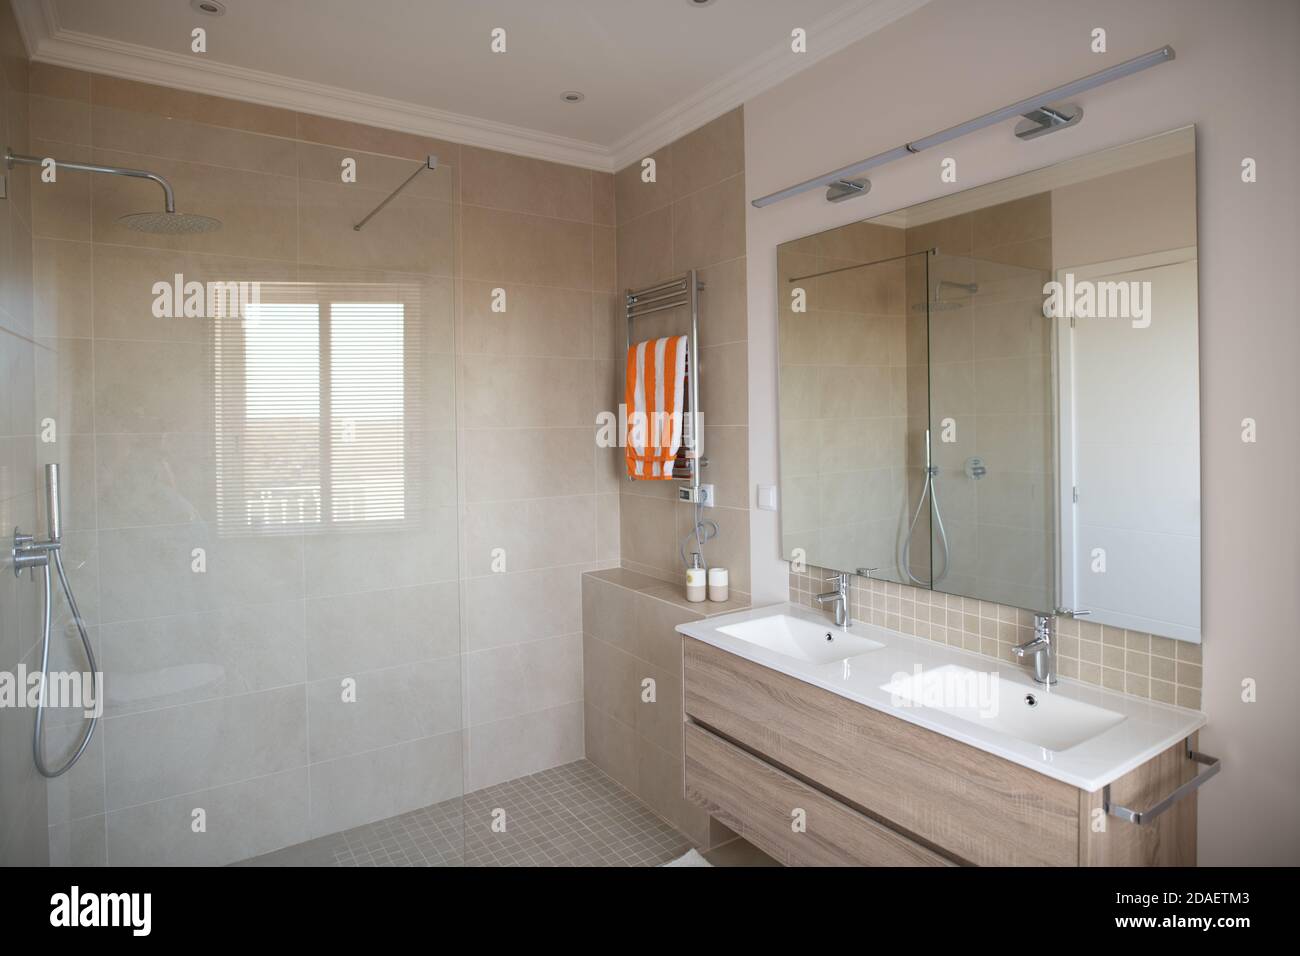 En suite bathroom with large tiled shower and double sink with mirror Stock Photo